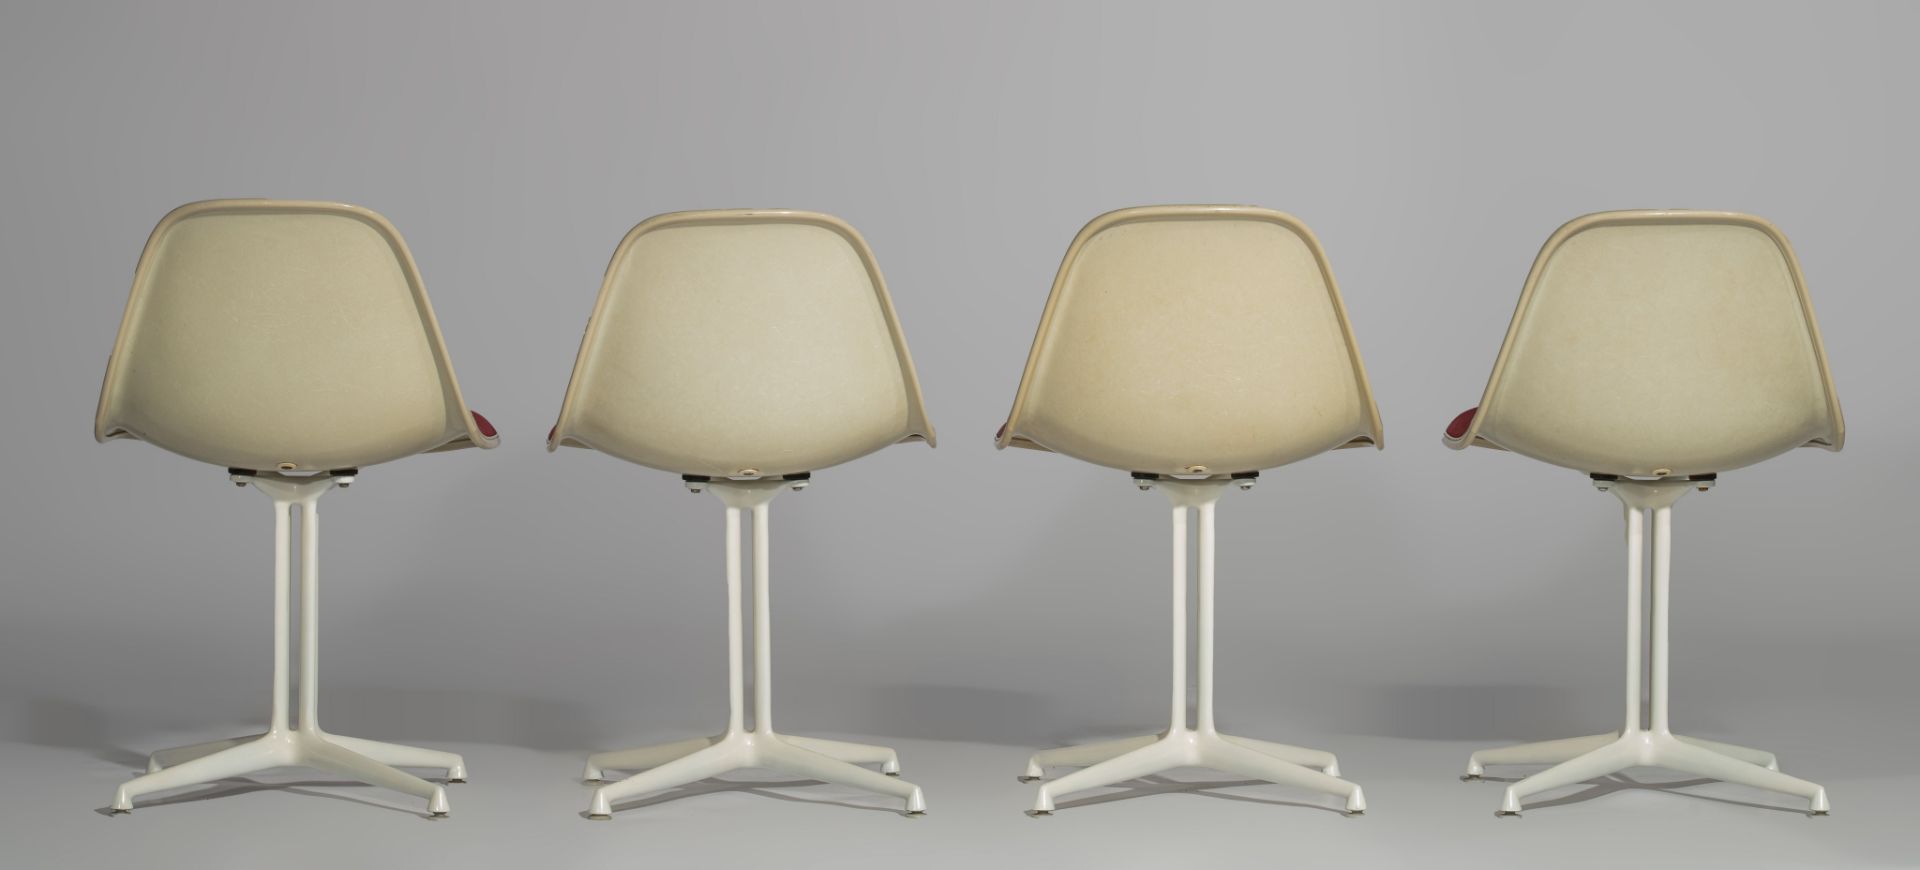 An exceptional set of 4 Eames fibreglass DSL chairs for Vitra, H 71 - W 48 cm - Image 4 of 9